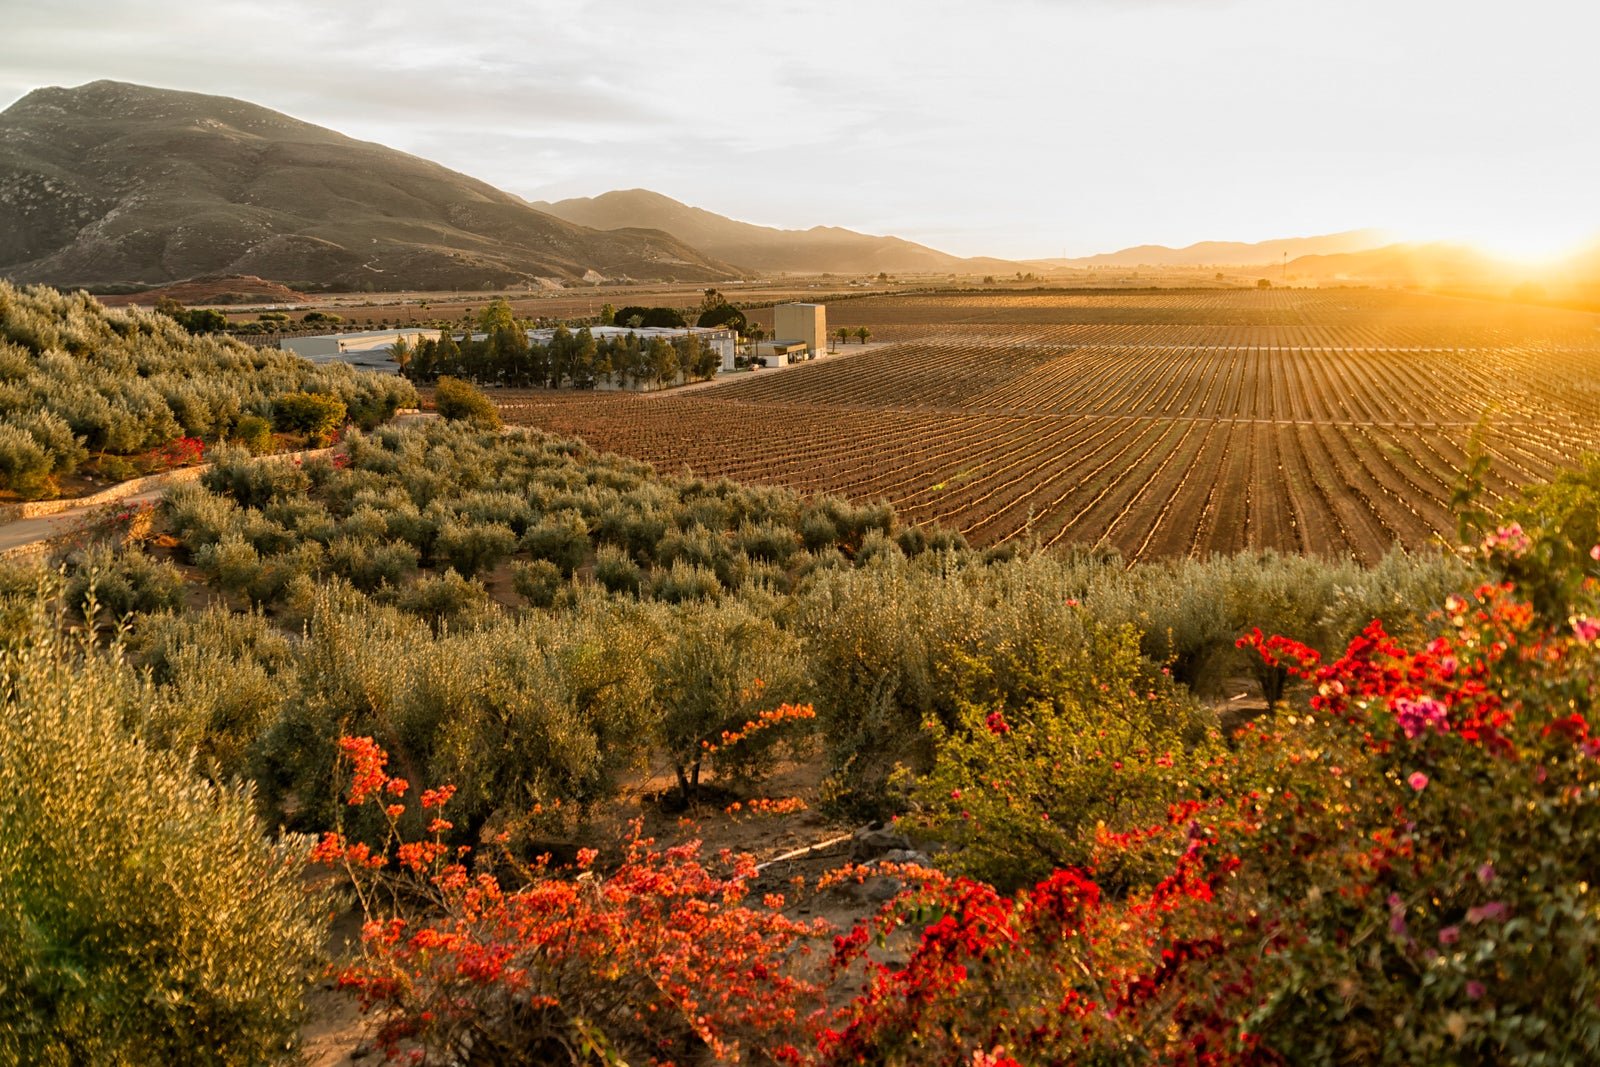 TPG’s guide to Mexico’s answer to Napa Valley: Valle de Guadalupe